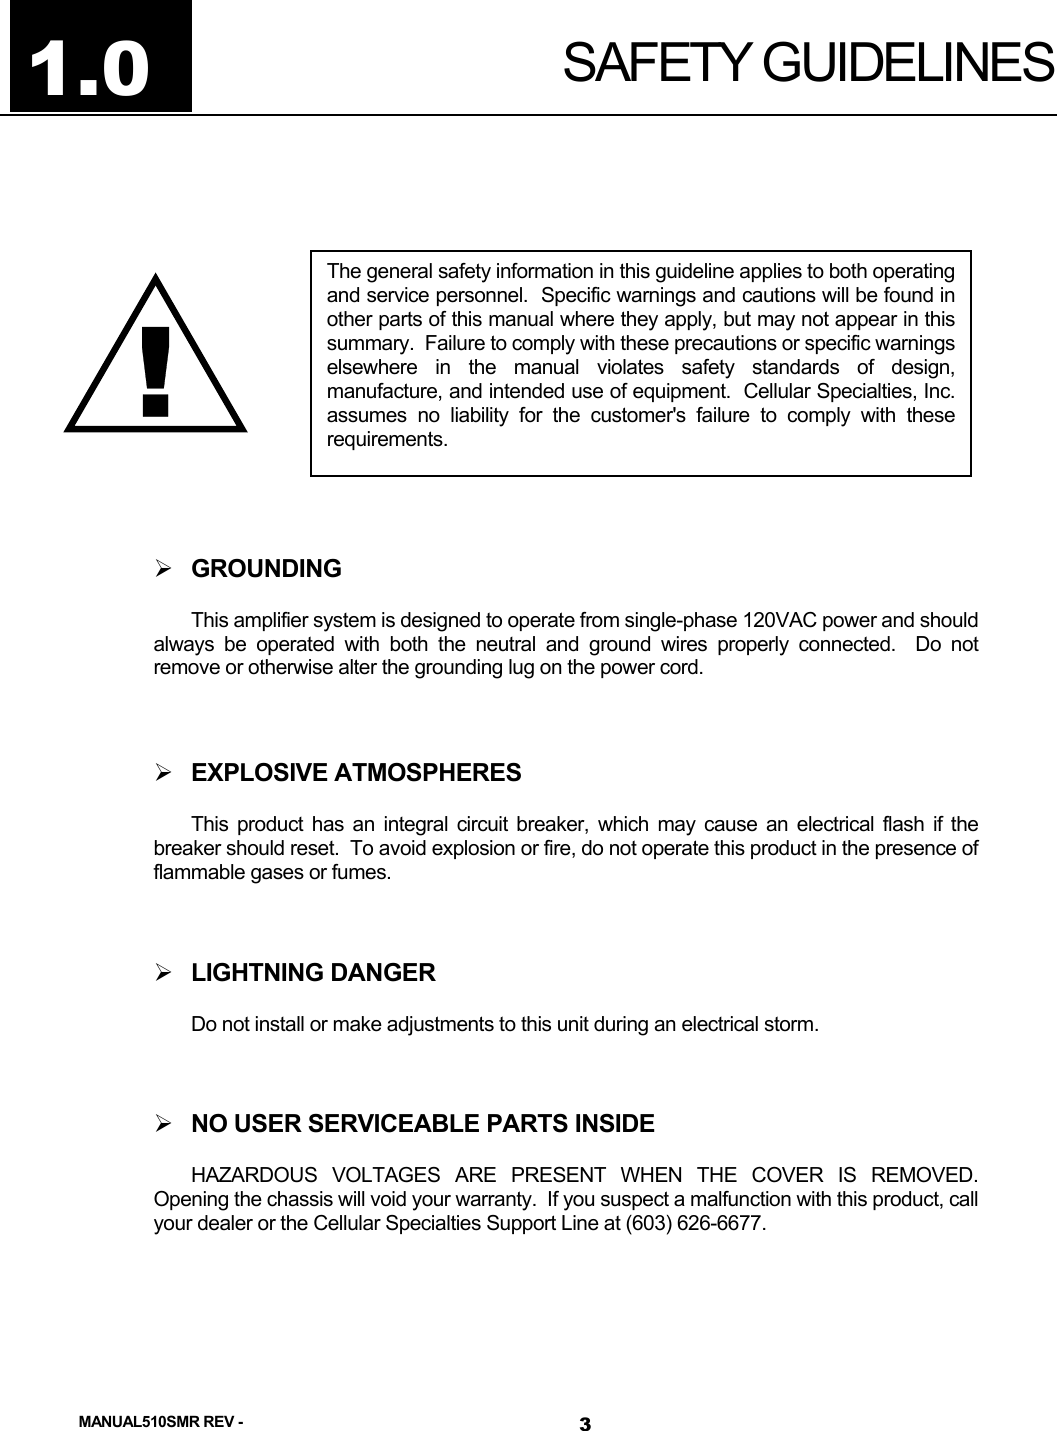  SAFETY GUIDELINES 1.0  The general safety information in this guideline applies to both operatingand service personnel.  Specific warnings and cautions will be found inother parts of this manual where they apply, but may not appear in thissummary.  Failure to comply with these precautions or specific warningselsewhere in the manual violates safety standards of design,manufacture, and intended use of equipment.  Cellular Specialties, Inc.assumes no liability for the customer&apos;s failure to comply with theserequirements. !   GROUNDING This amplifier system is designed to operate from single-phase 120VAC power and should always be operated with both the neutral and ground wires properly connected.  Do not remove or otherwise alter the grounding lug on the power cord.   EXPLOSIVE ATMOSPHERES This product has an integral circuit breaker, which may cause an electrical flash if the breaker should reset.  To avoid explosion or fire, do not operate this product in the presence of flammable gases or fumes.   LIGHTNING DANGER Do not install or make adjustments to this unit during an electrical storm.   NO USER SERVICEABLE PARTS INSIDE HAZARDOUS VOLTAGES ARE PRESENT WHEN THE COVER IS REMOVED.  Opening the chassis will void your warranty.  If you suspect a malfunction with this product, call your dealer or the Cellular Specialties Support Line at (603) 626-6677.  MANUAL510SMR REV -  3